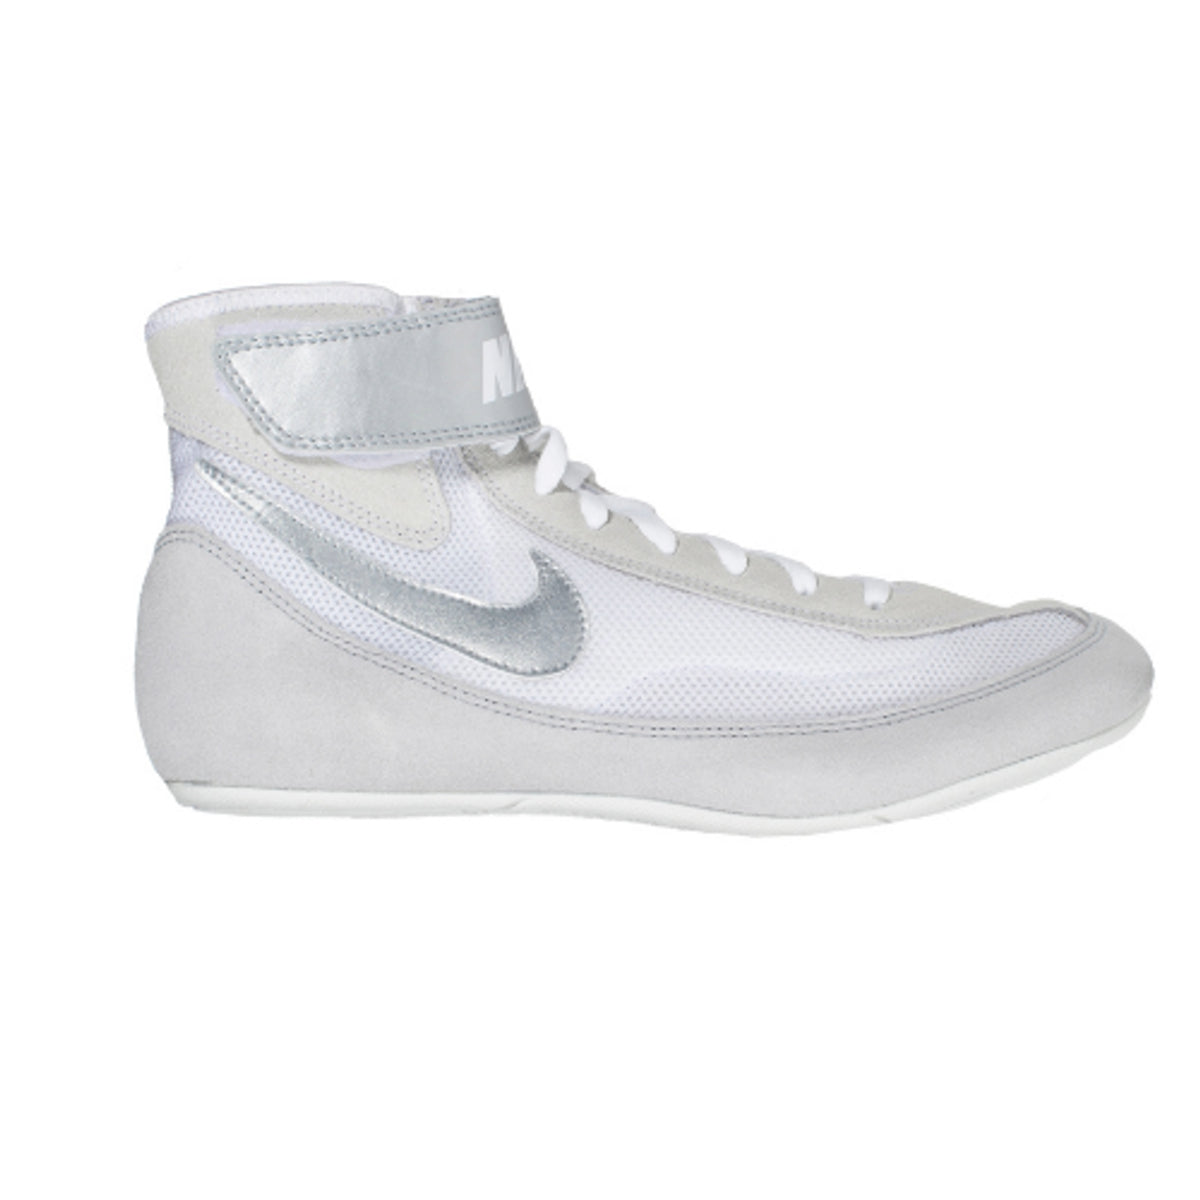 White/Silver Nike Speedsweep VII Wrestling Boots from Made4Fighters